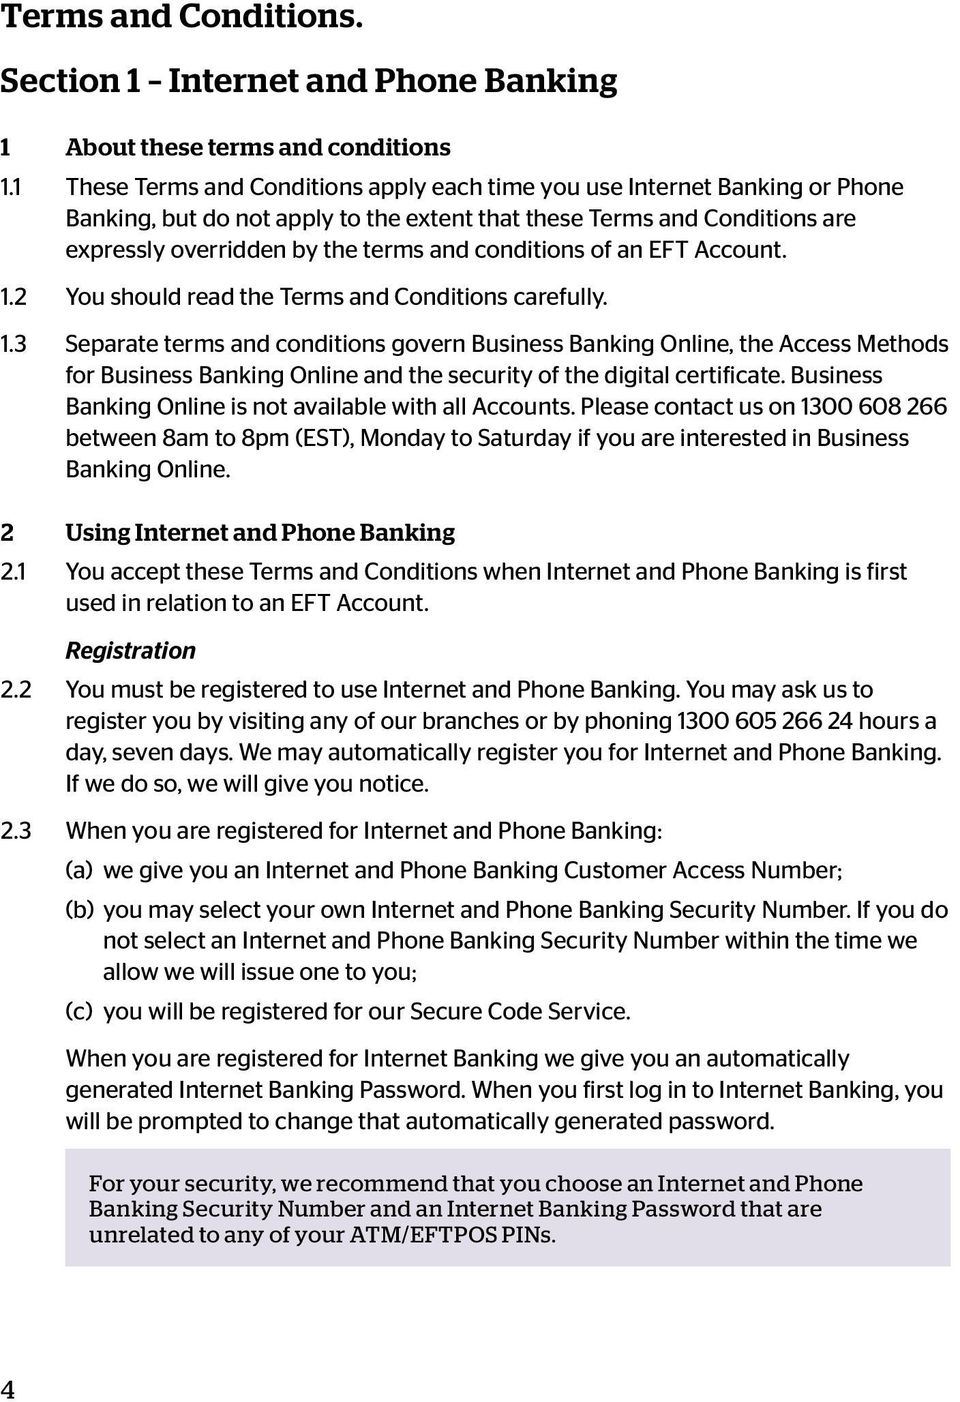 conditions of an EFT Account. 1.2 You should read the Terms and Conditions carefully. 1.3 Separate terms and conditions govern Business Banking Online, the Access Methods for Business Banking Online and the security of the digital certificate.